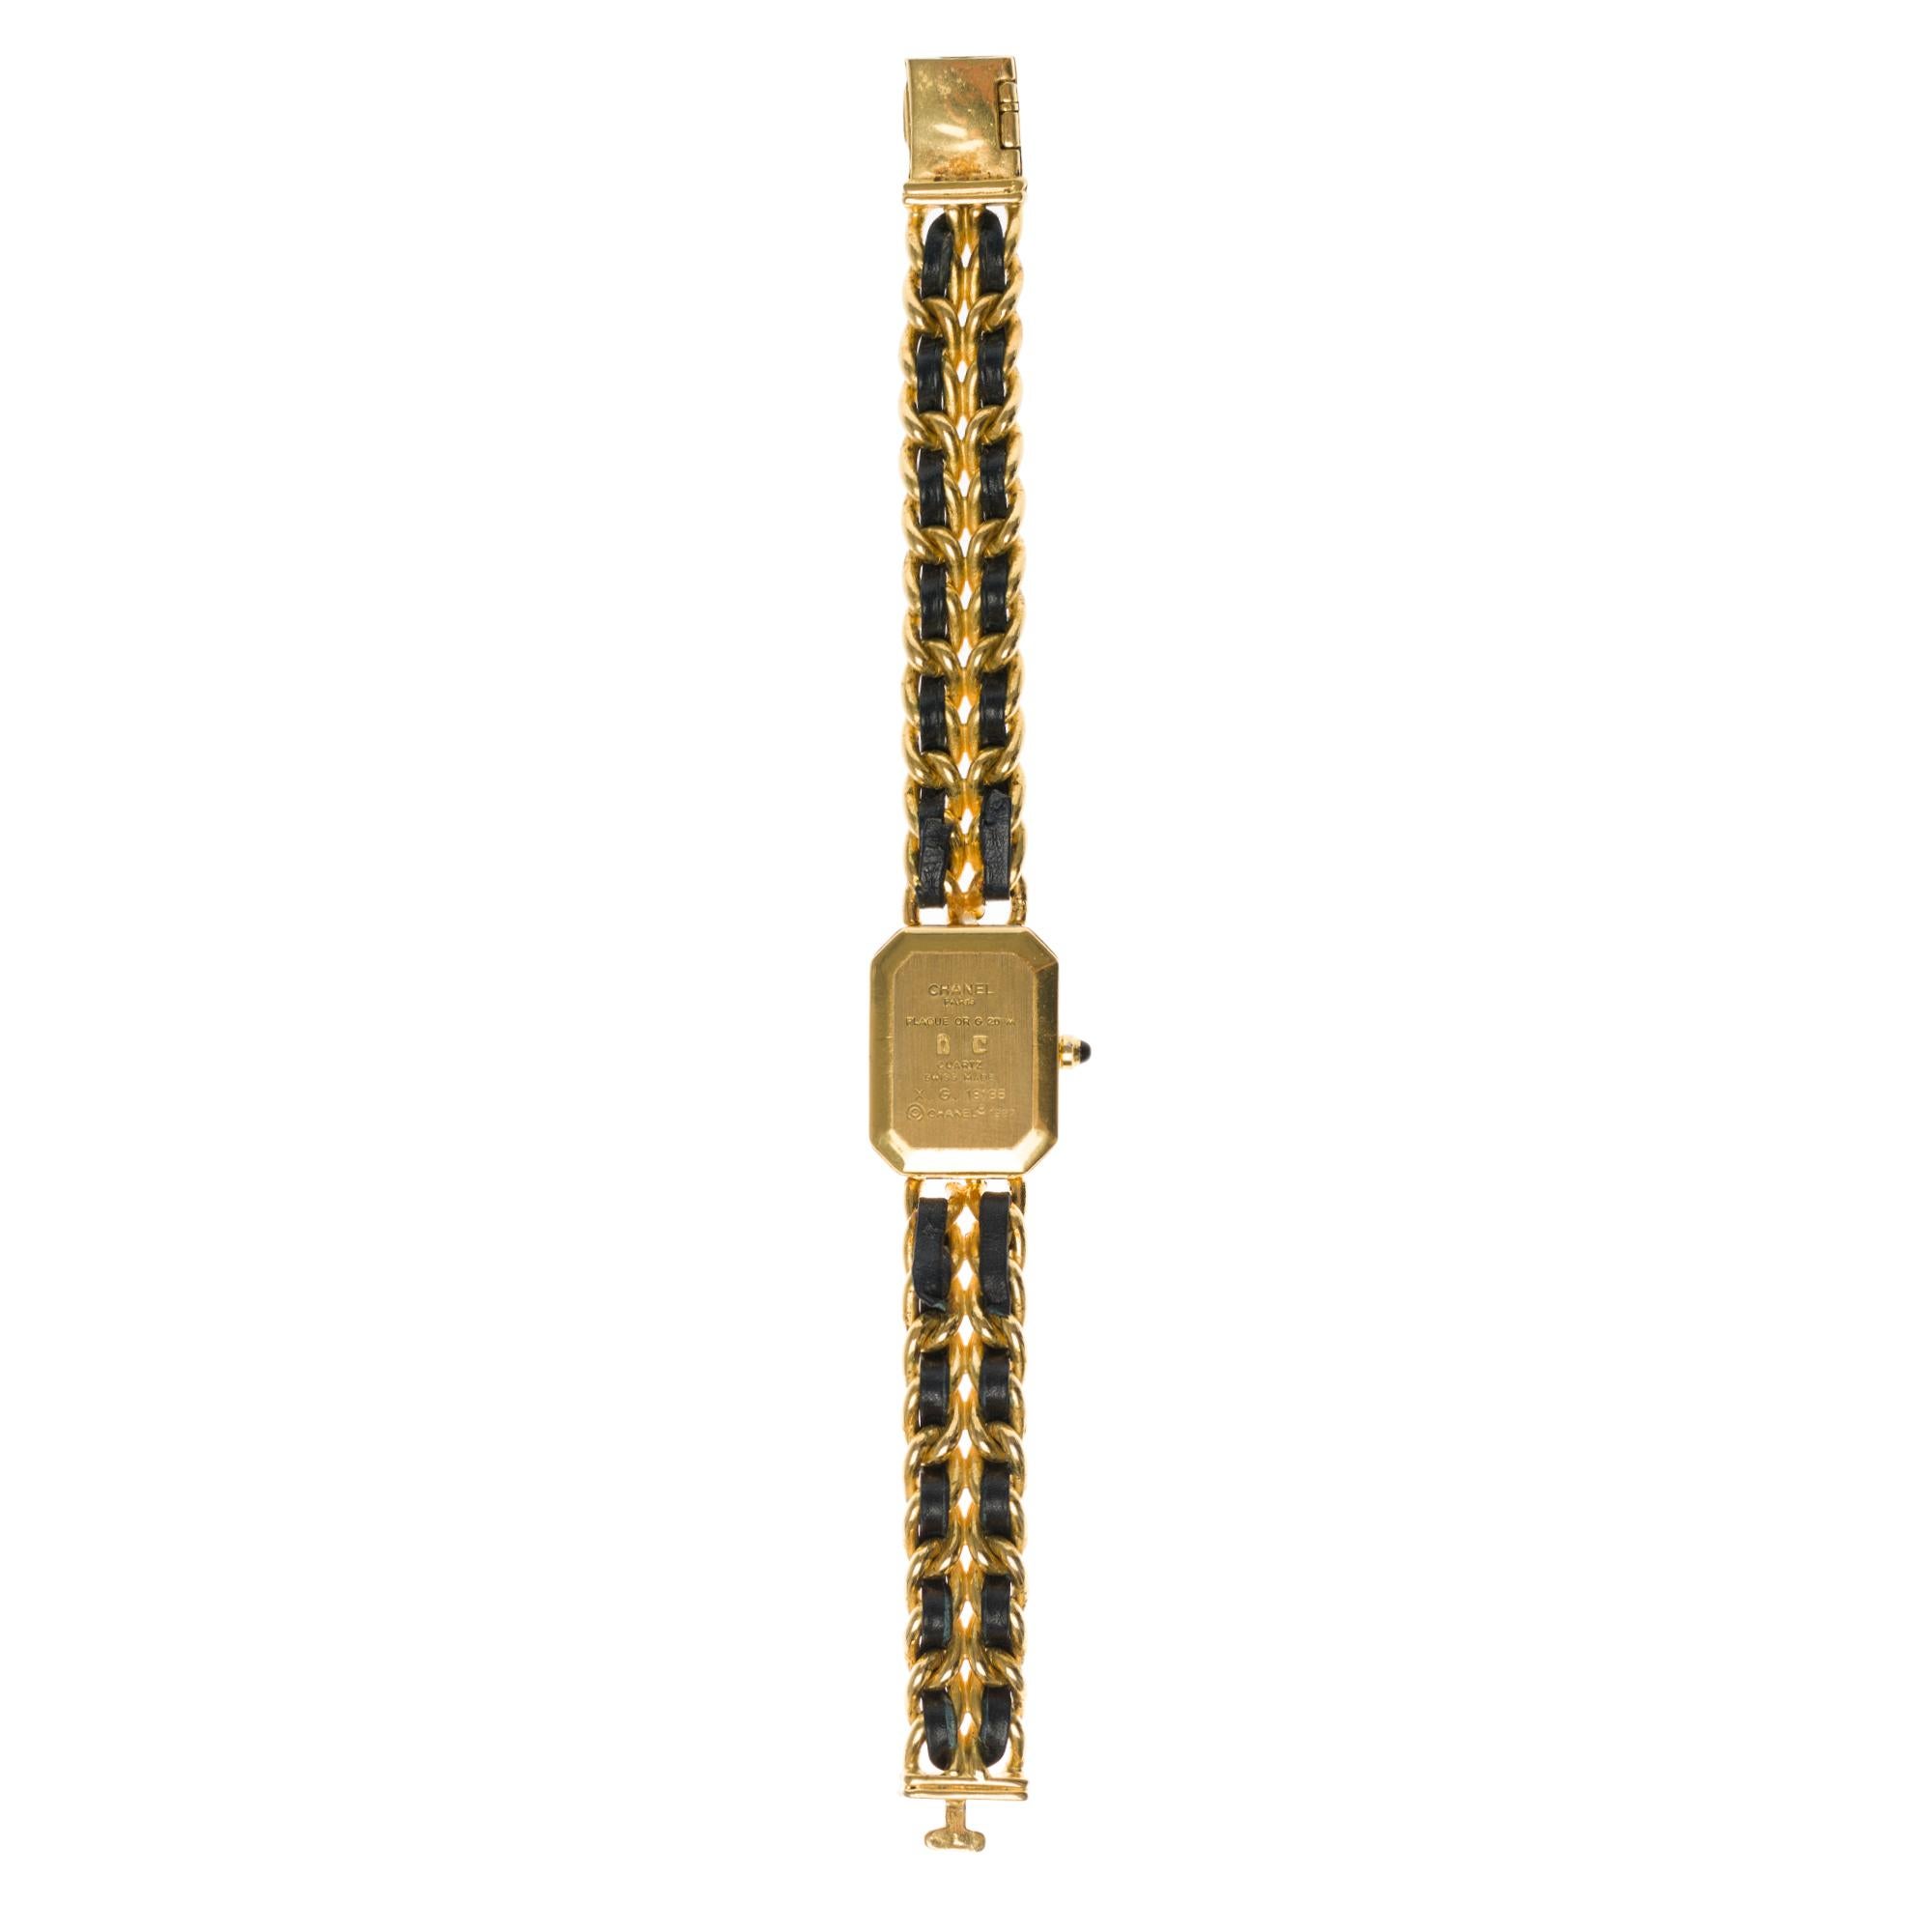 Chanel Première women’s wristwatch in gold plated. Octagonal case in gold plated with faceted glass, crown set with a black cabochon.

Black dial, quartz movement.
Gold plated stick needles.
Bracelet in gold and black plated and leather, clasp in